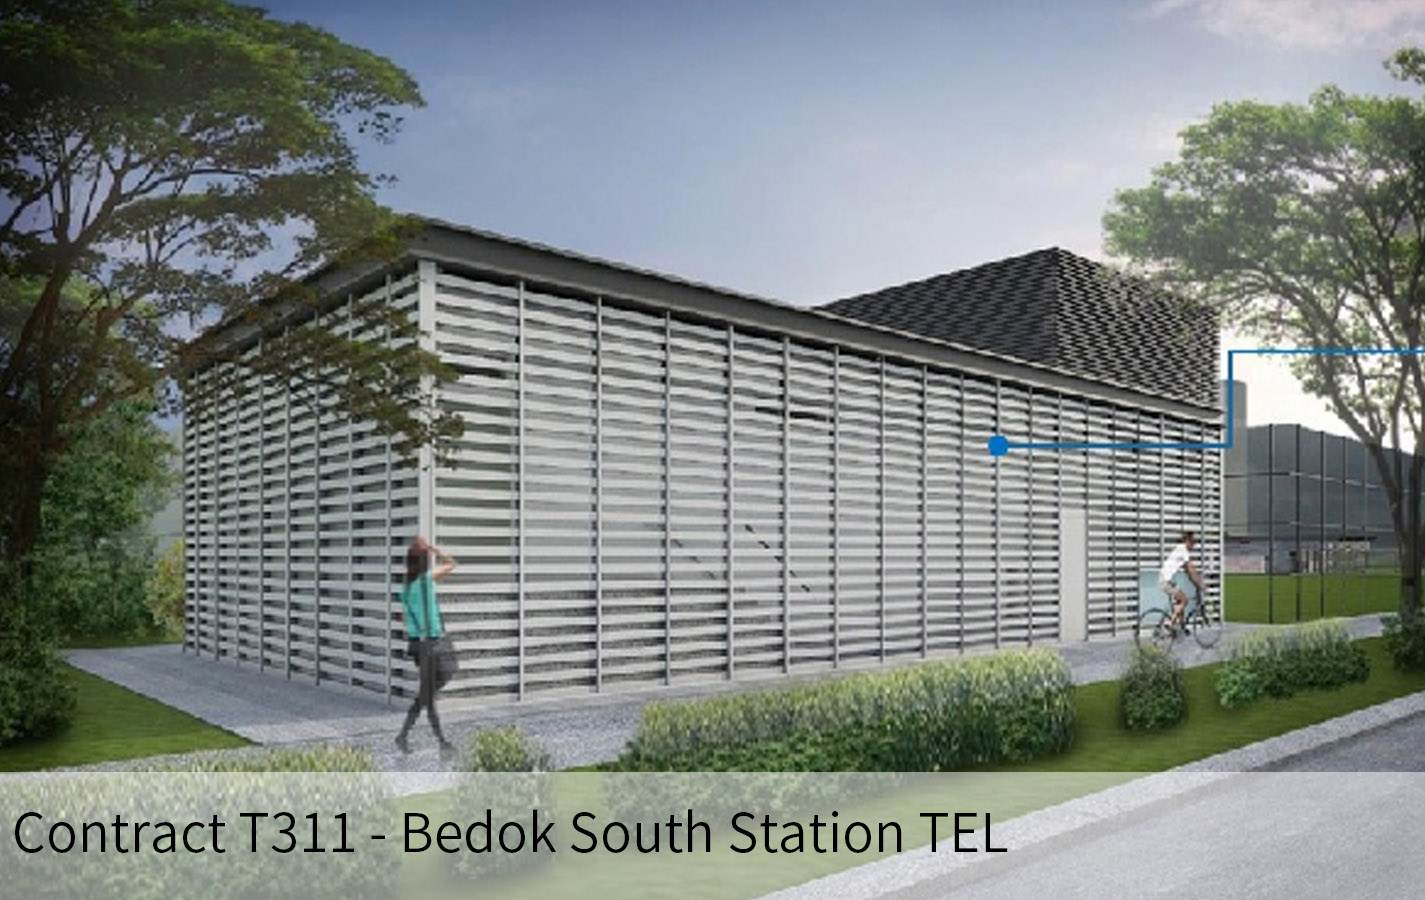 Contract T311 - Bedok South Station TEL, Singapore